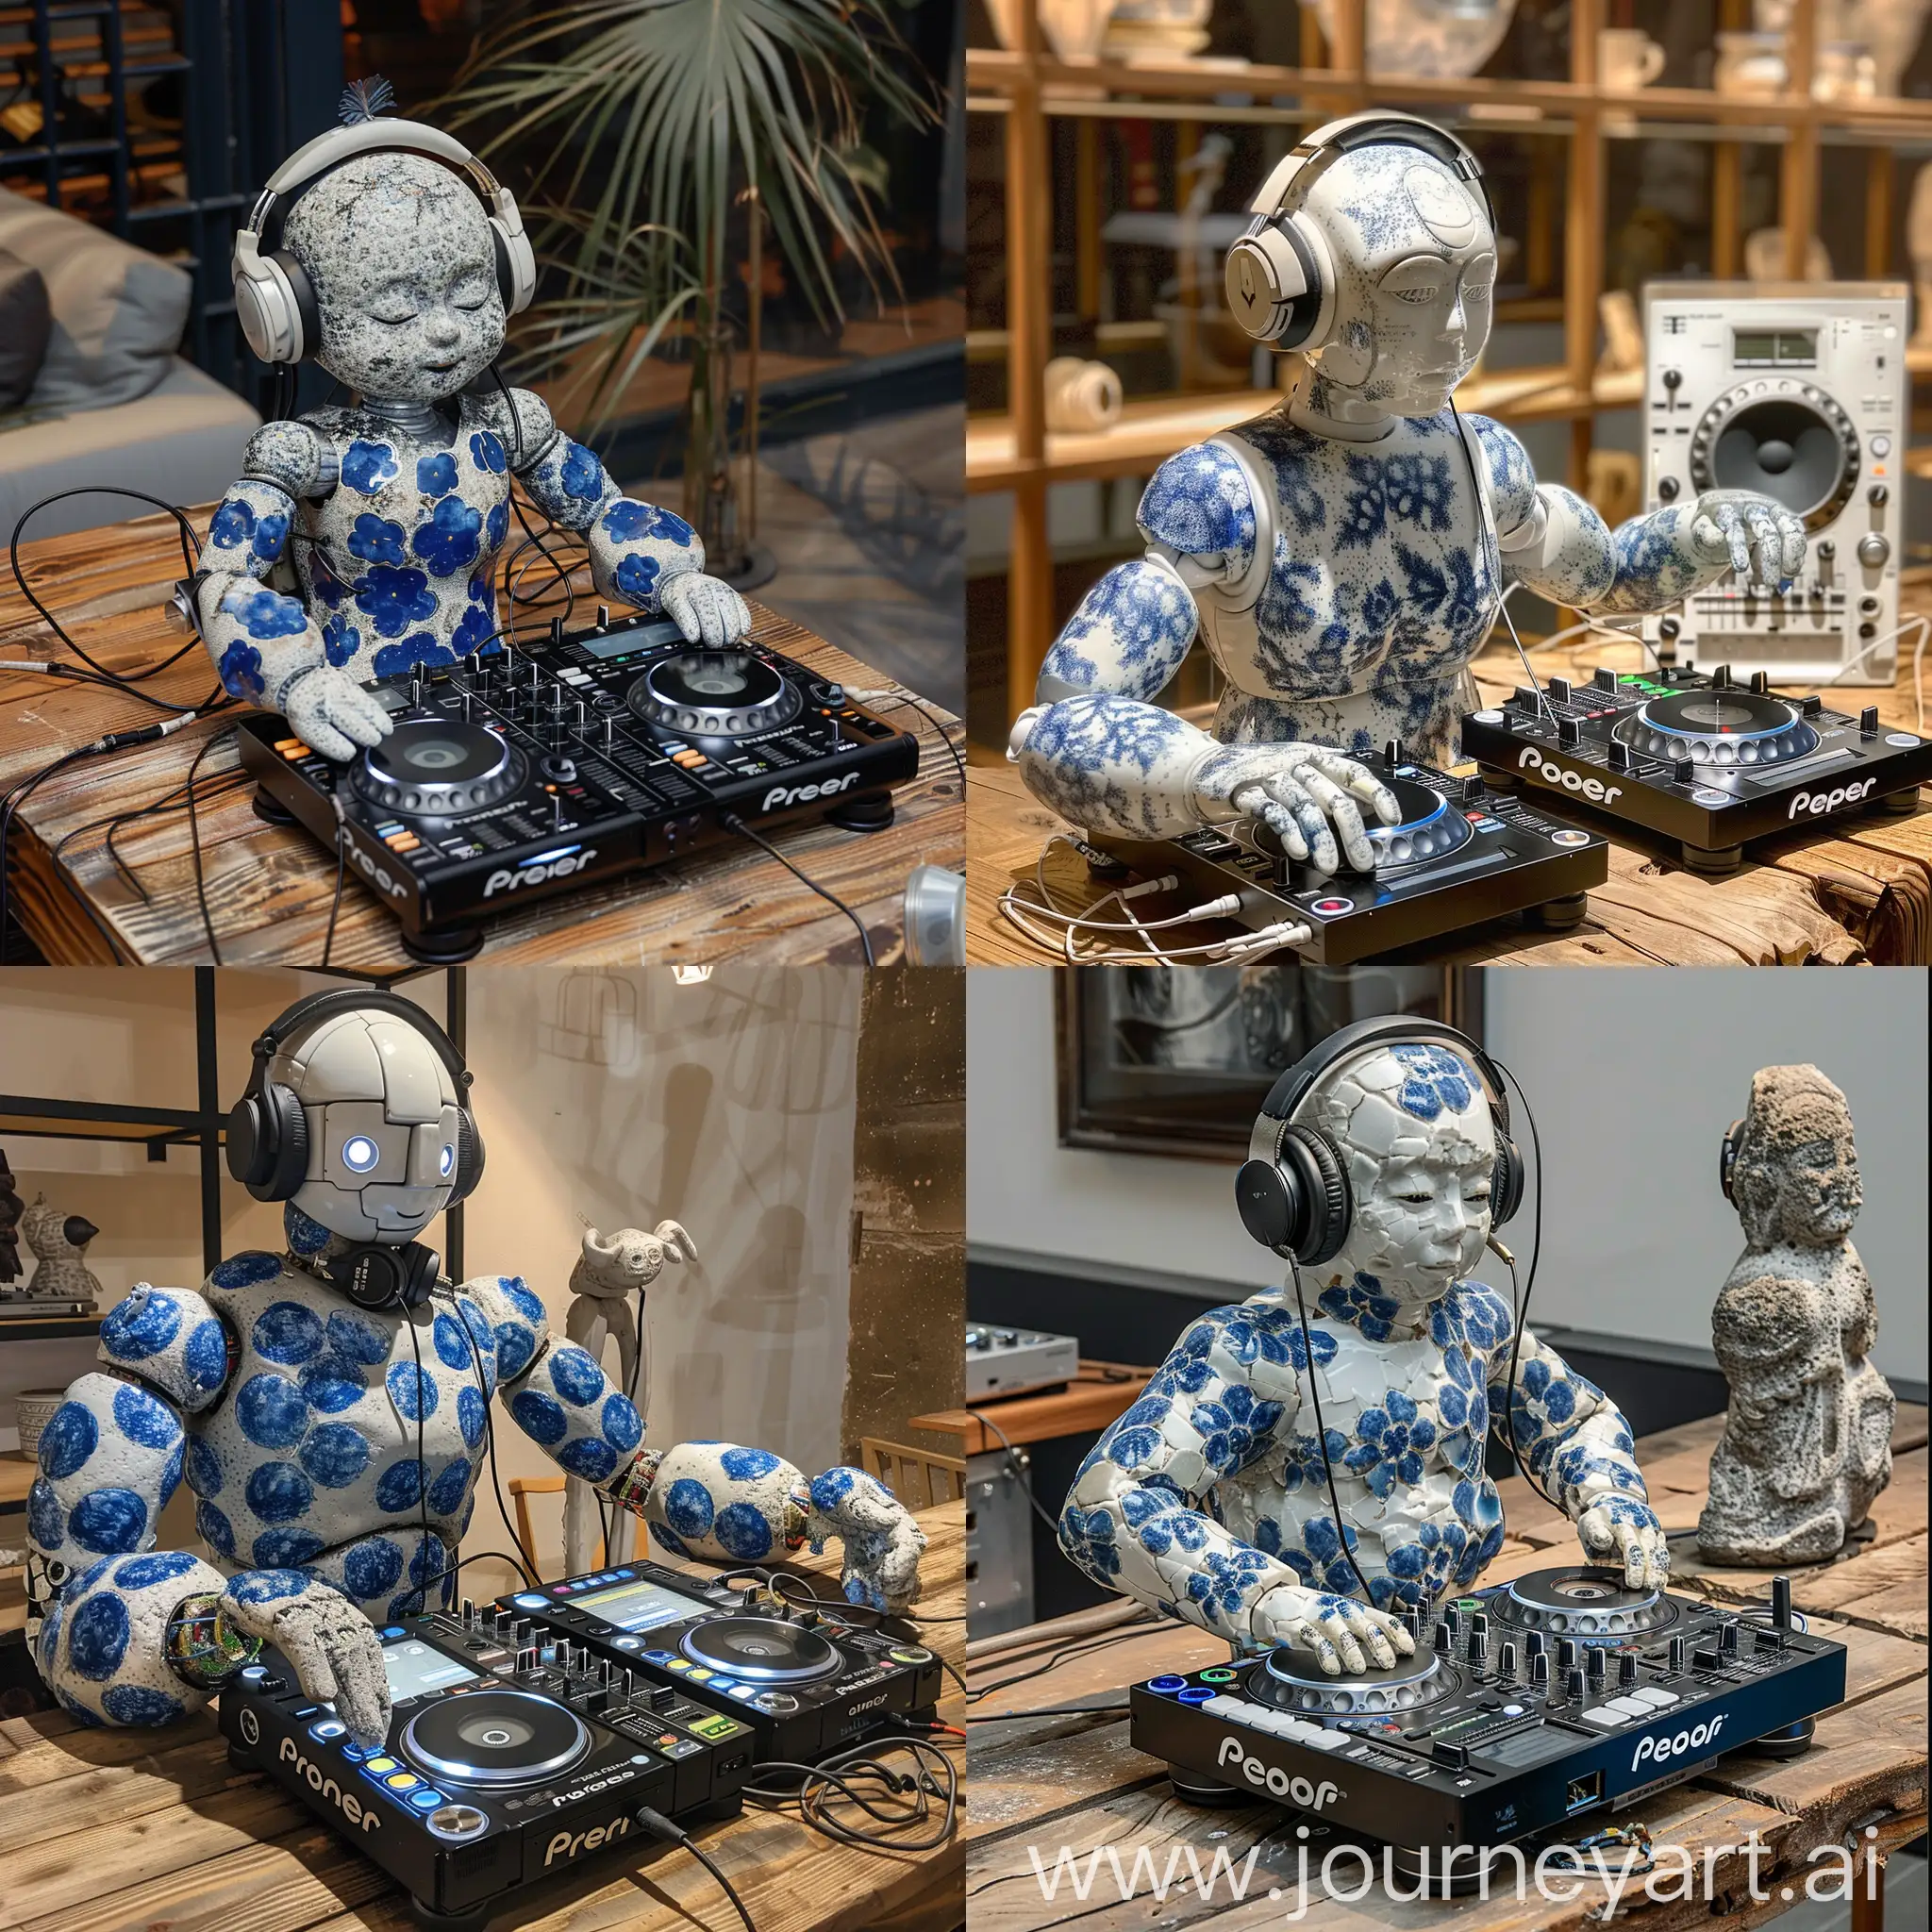 DJ-Humanoid-Robot-in-Blue-Flower-Room-with-Ceramic-Statue